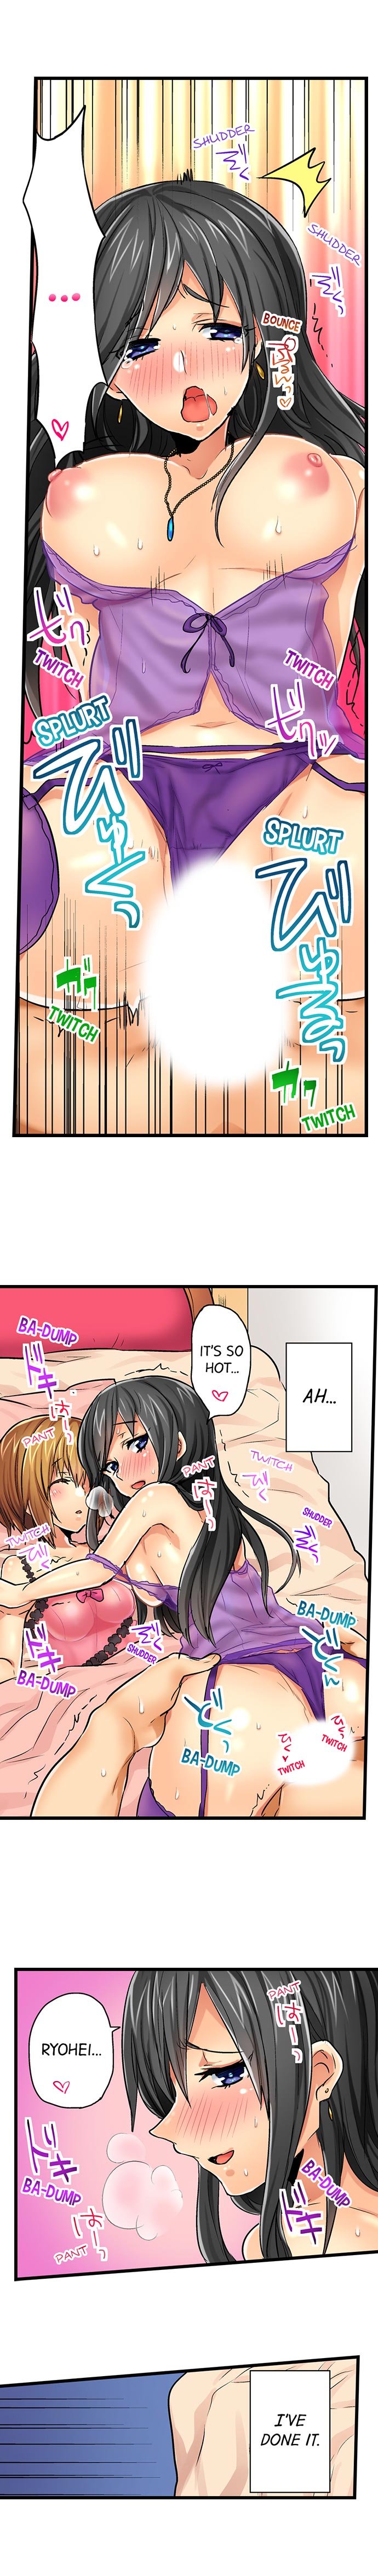 chance-to-fuuuck-joining-a-girls-night-out-chap-4-6